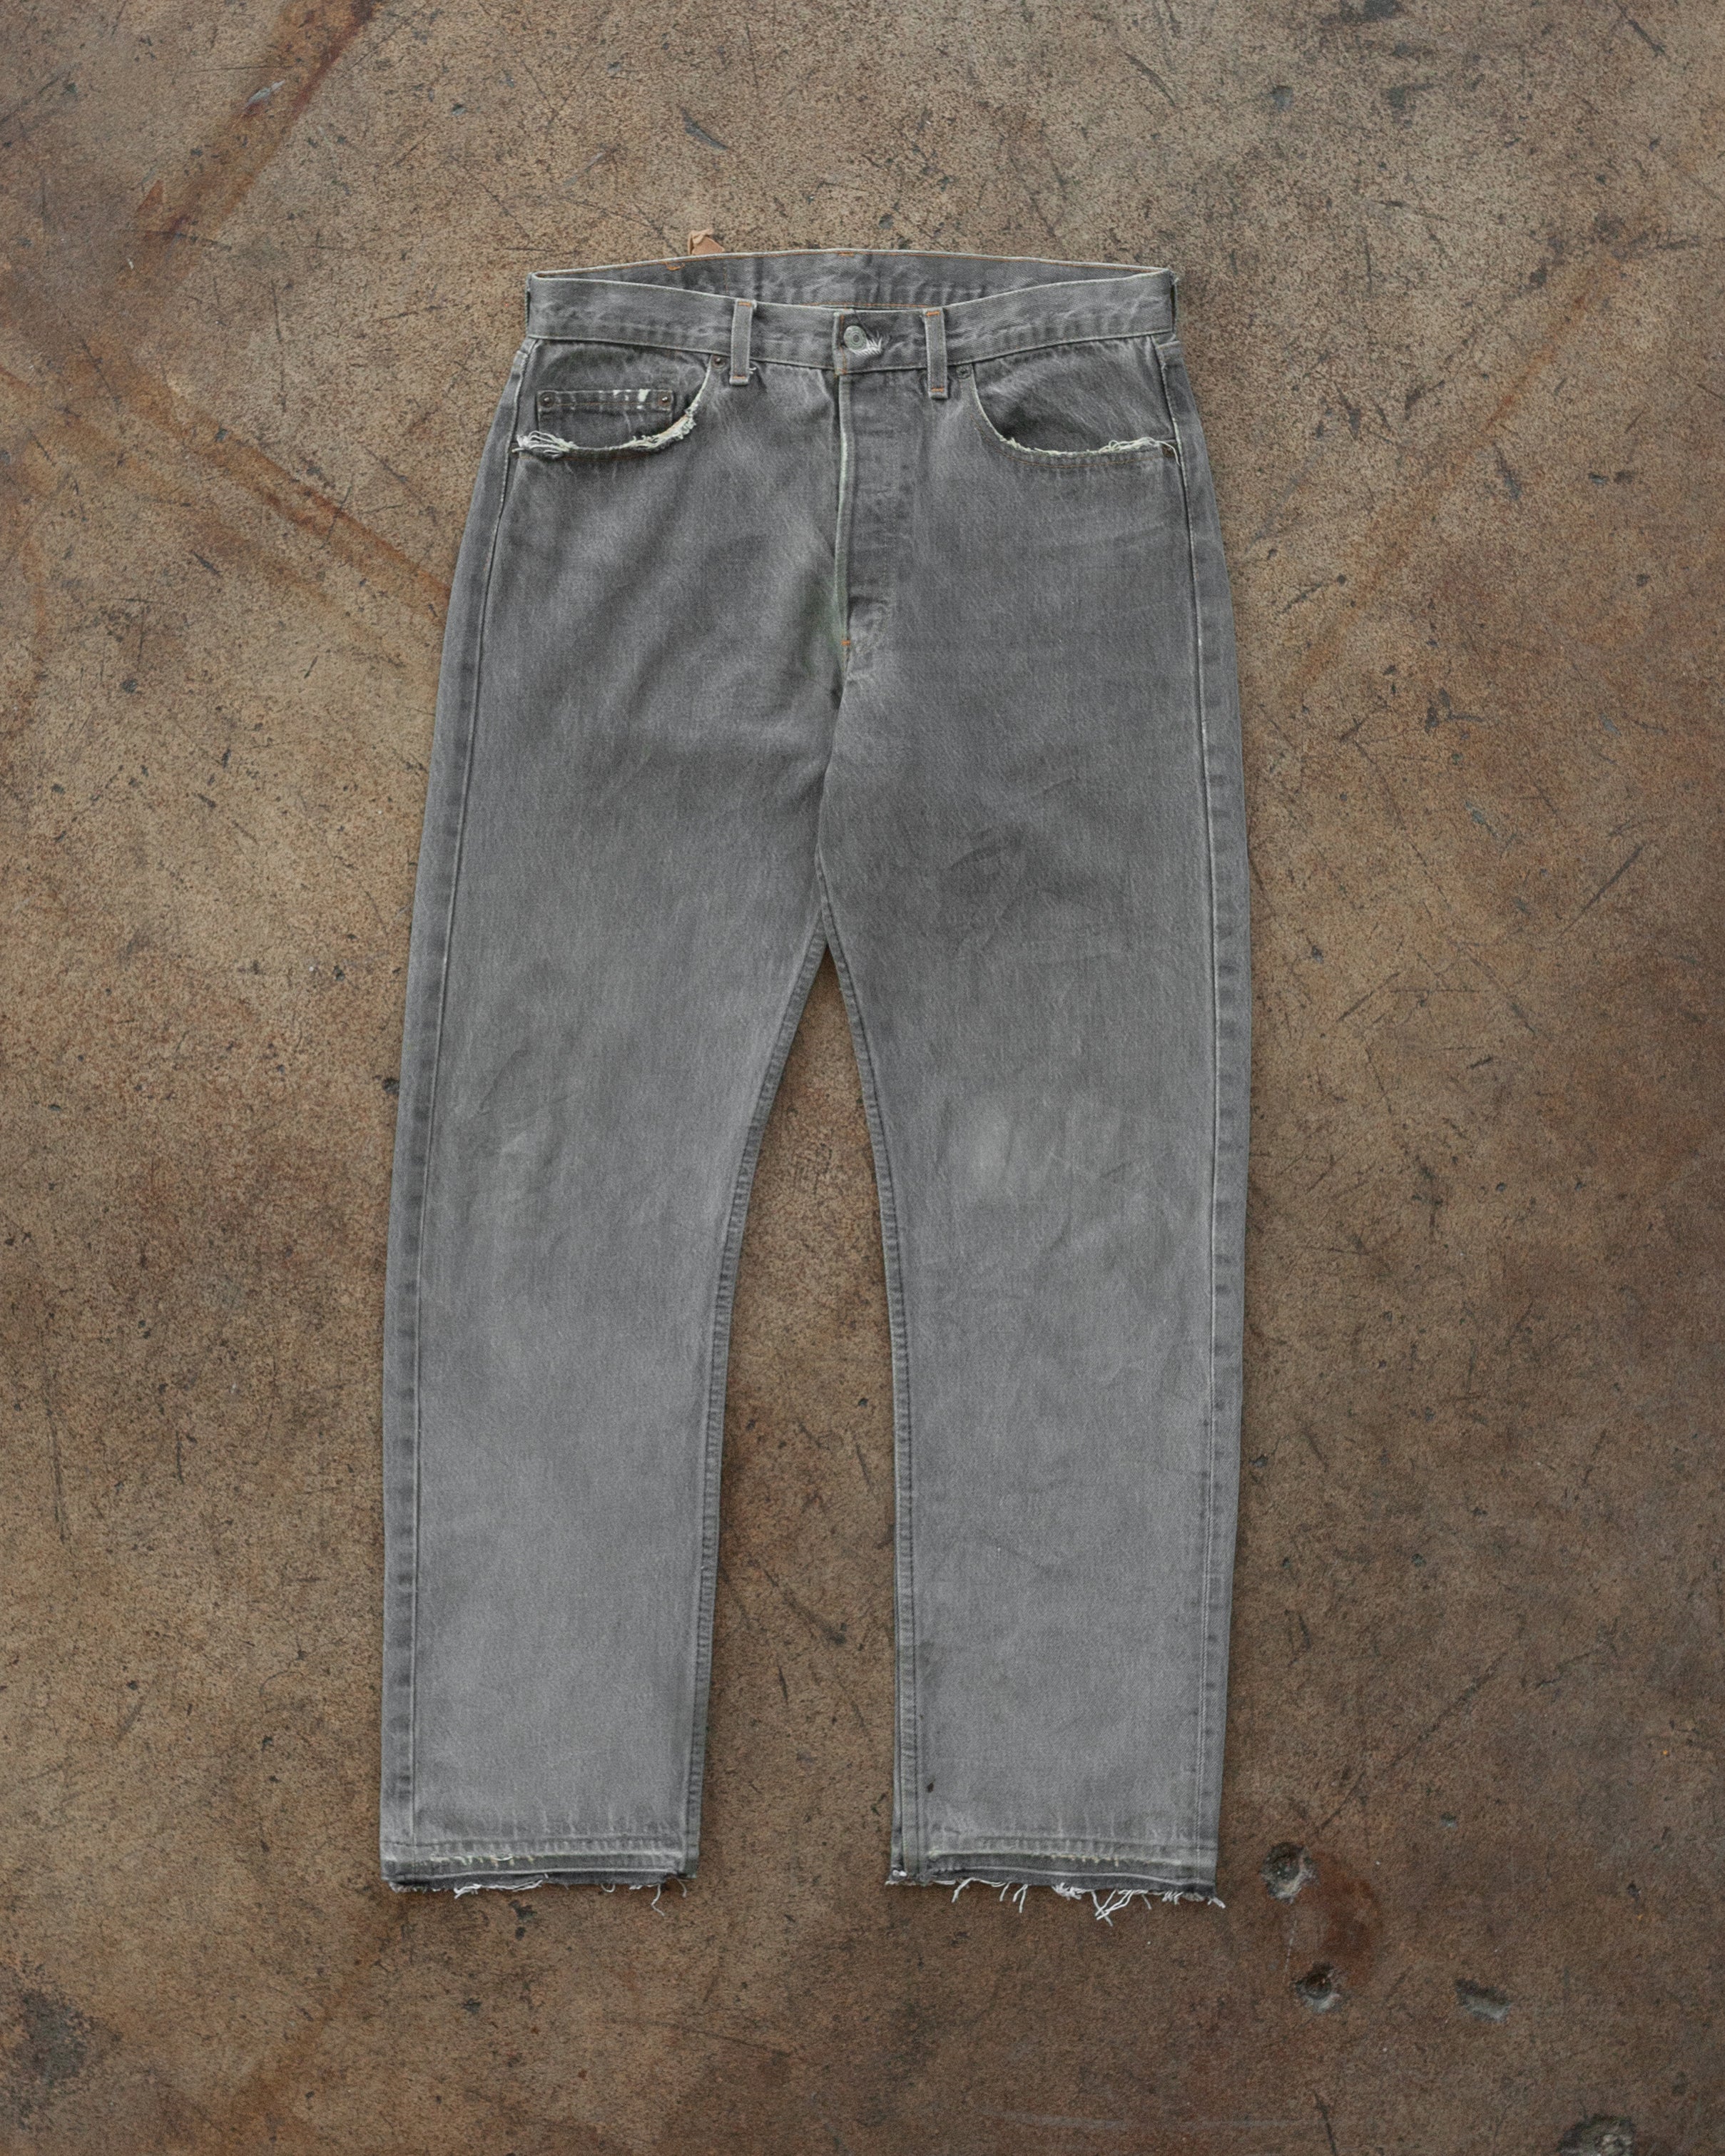 Levi's 501 Charcoal Grey Distressed Released Hem Jeans - 1990s ...